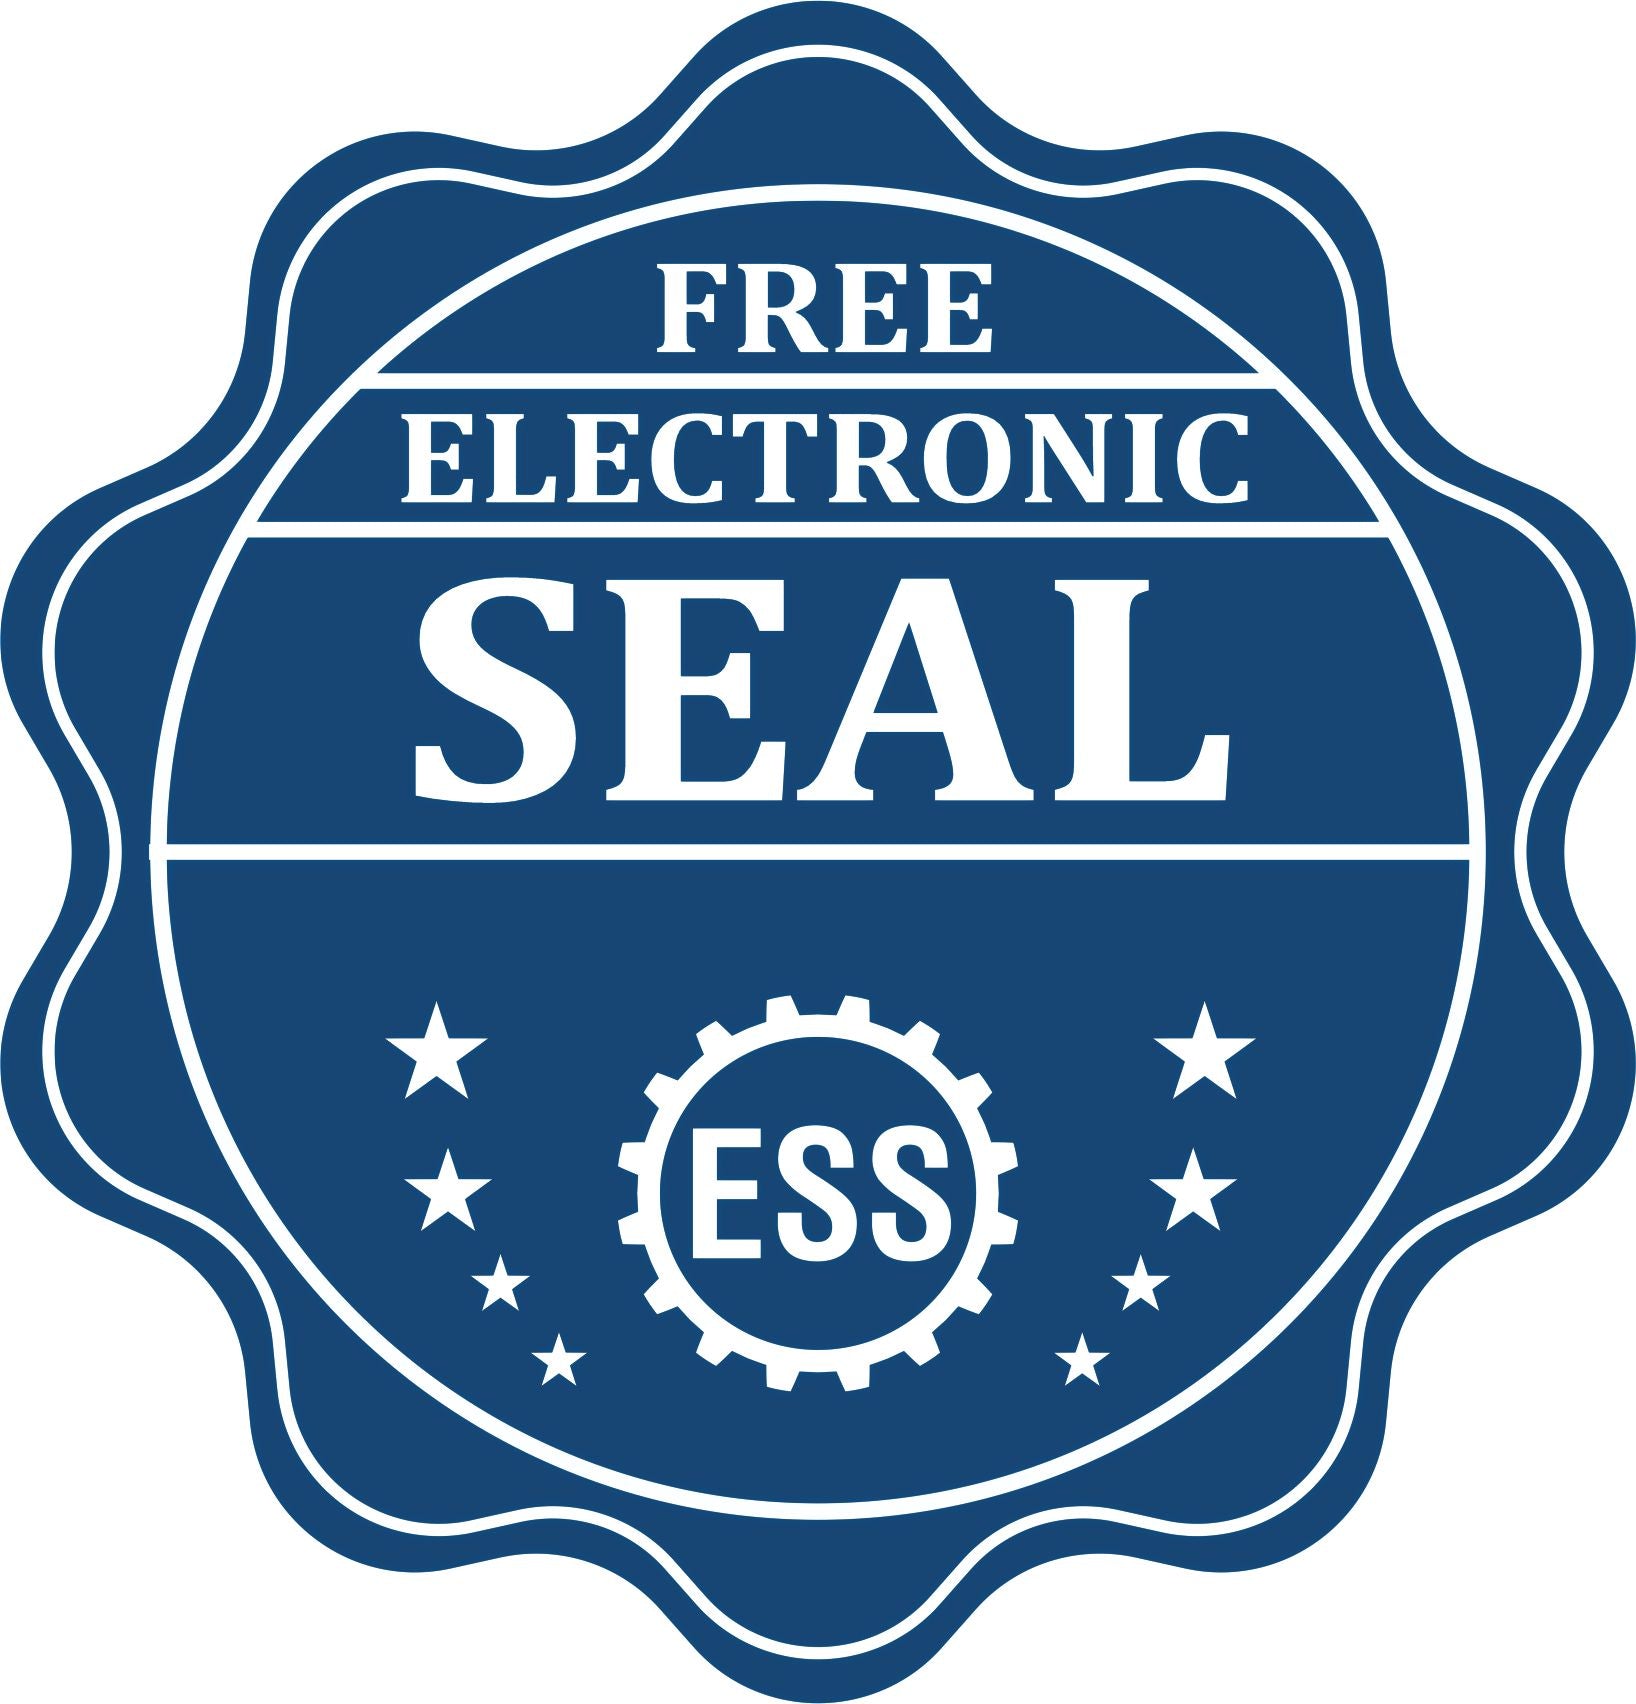 A badge showing a free electronic seal for the State of Alaska Extended Long Reach Geologist Seal with stars and the ESS gear on the emblem.